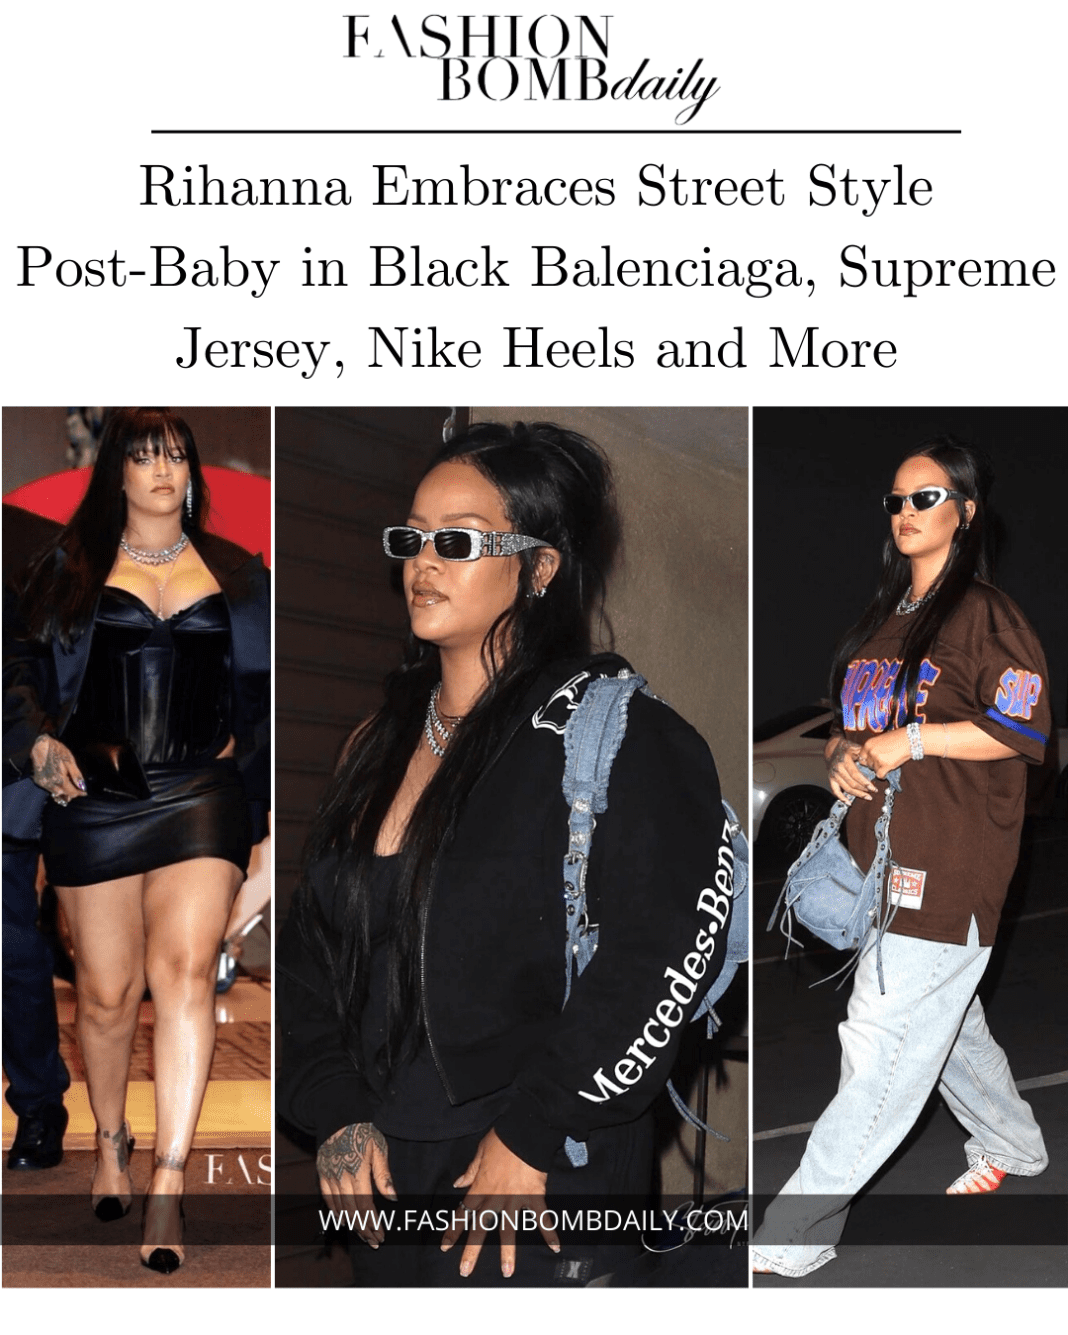 Rihanna Embraces Street Style Post-Baby in Black Balenciaga, Supreme Jersey, Nike and More